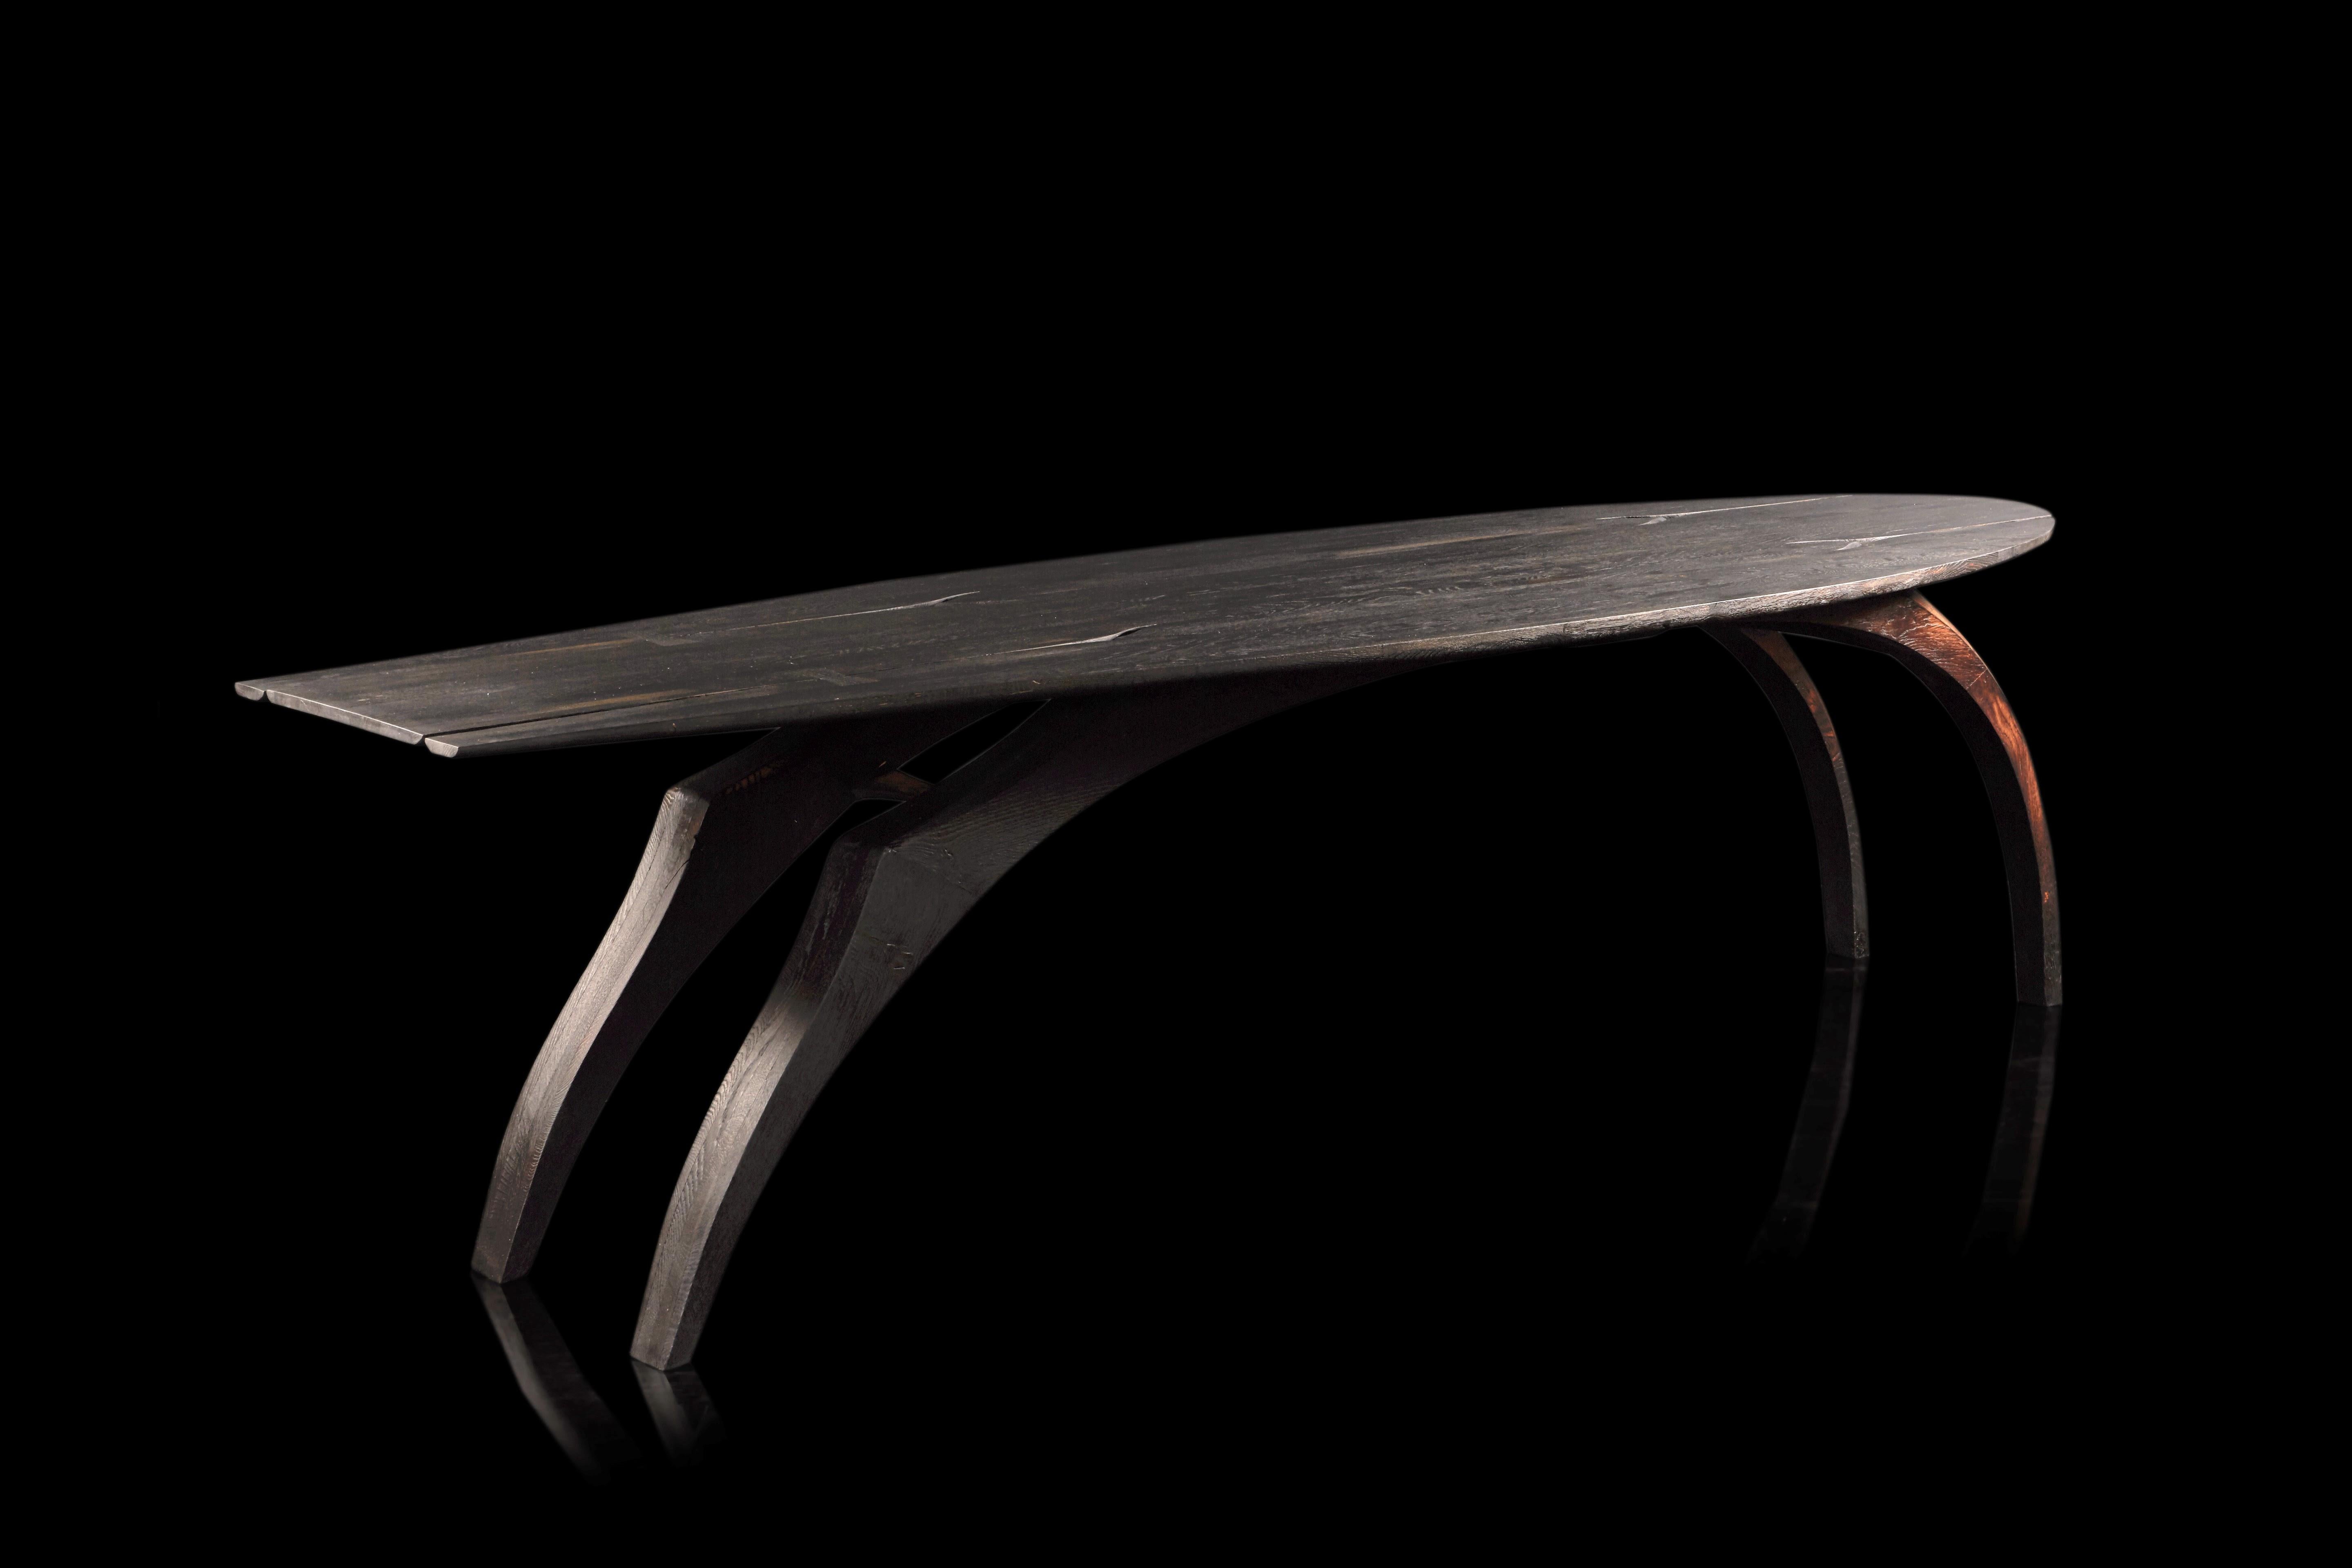 The Leap table was completed in 2019.
The design suggests the fluid figure of an animal in motion.
– Made from English oak with an ebonised top.
– The legs are brushed to enhance the grain and flame-scorched.
– Finished with protective hard wax